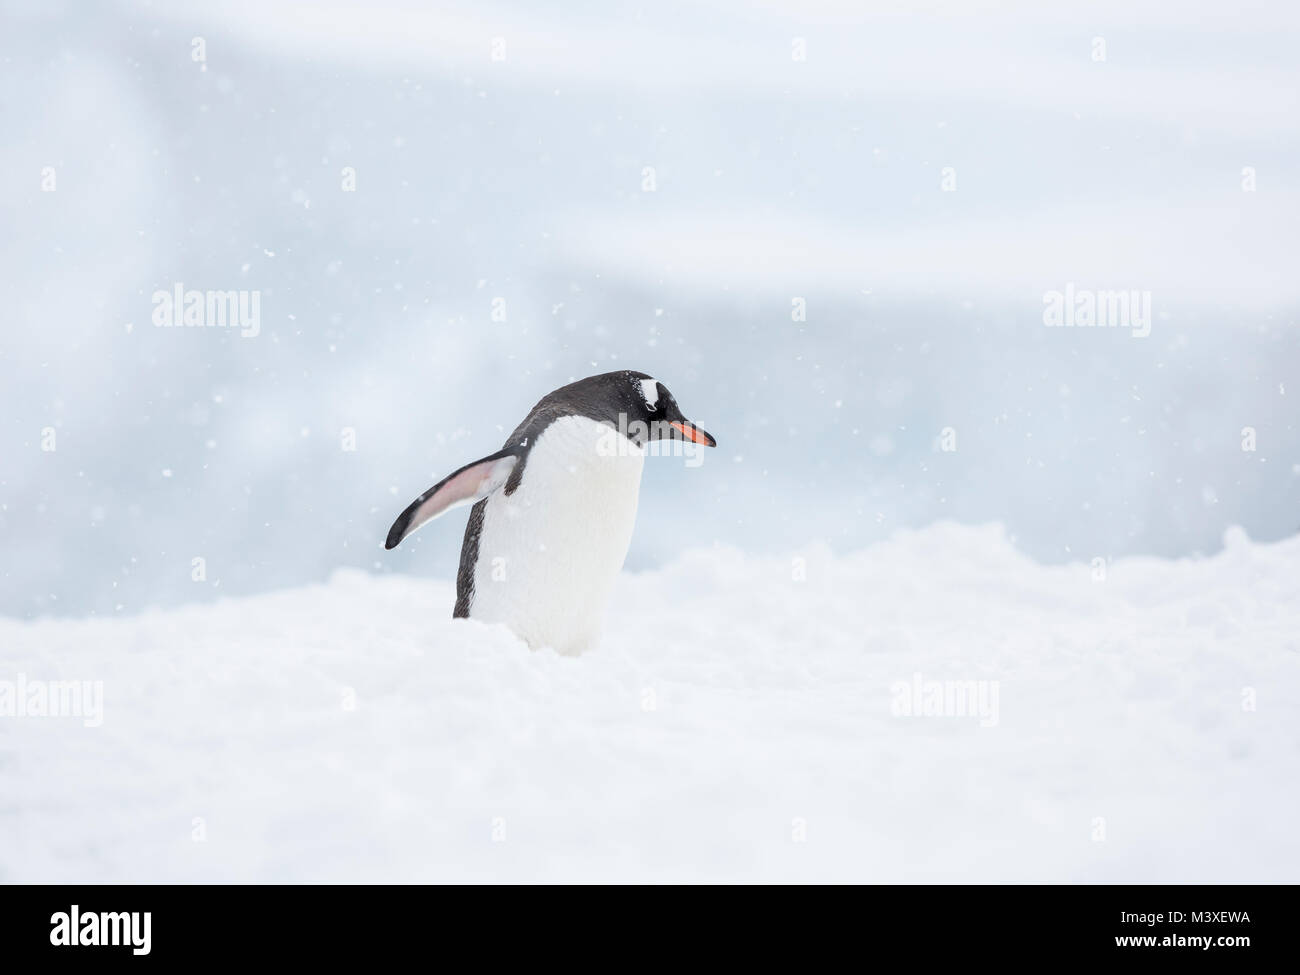 A photograph of a lone penguin against a snowy backdrop in Neko Harbour, Antarctica. Stock Photo